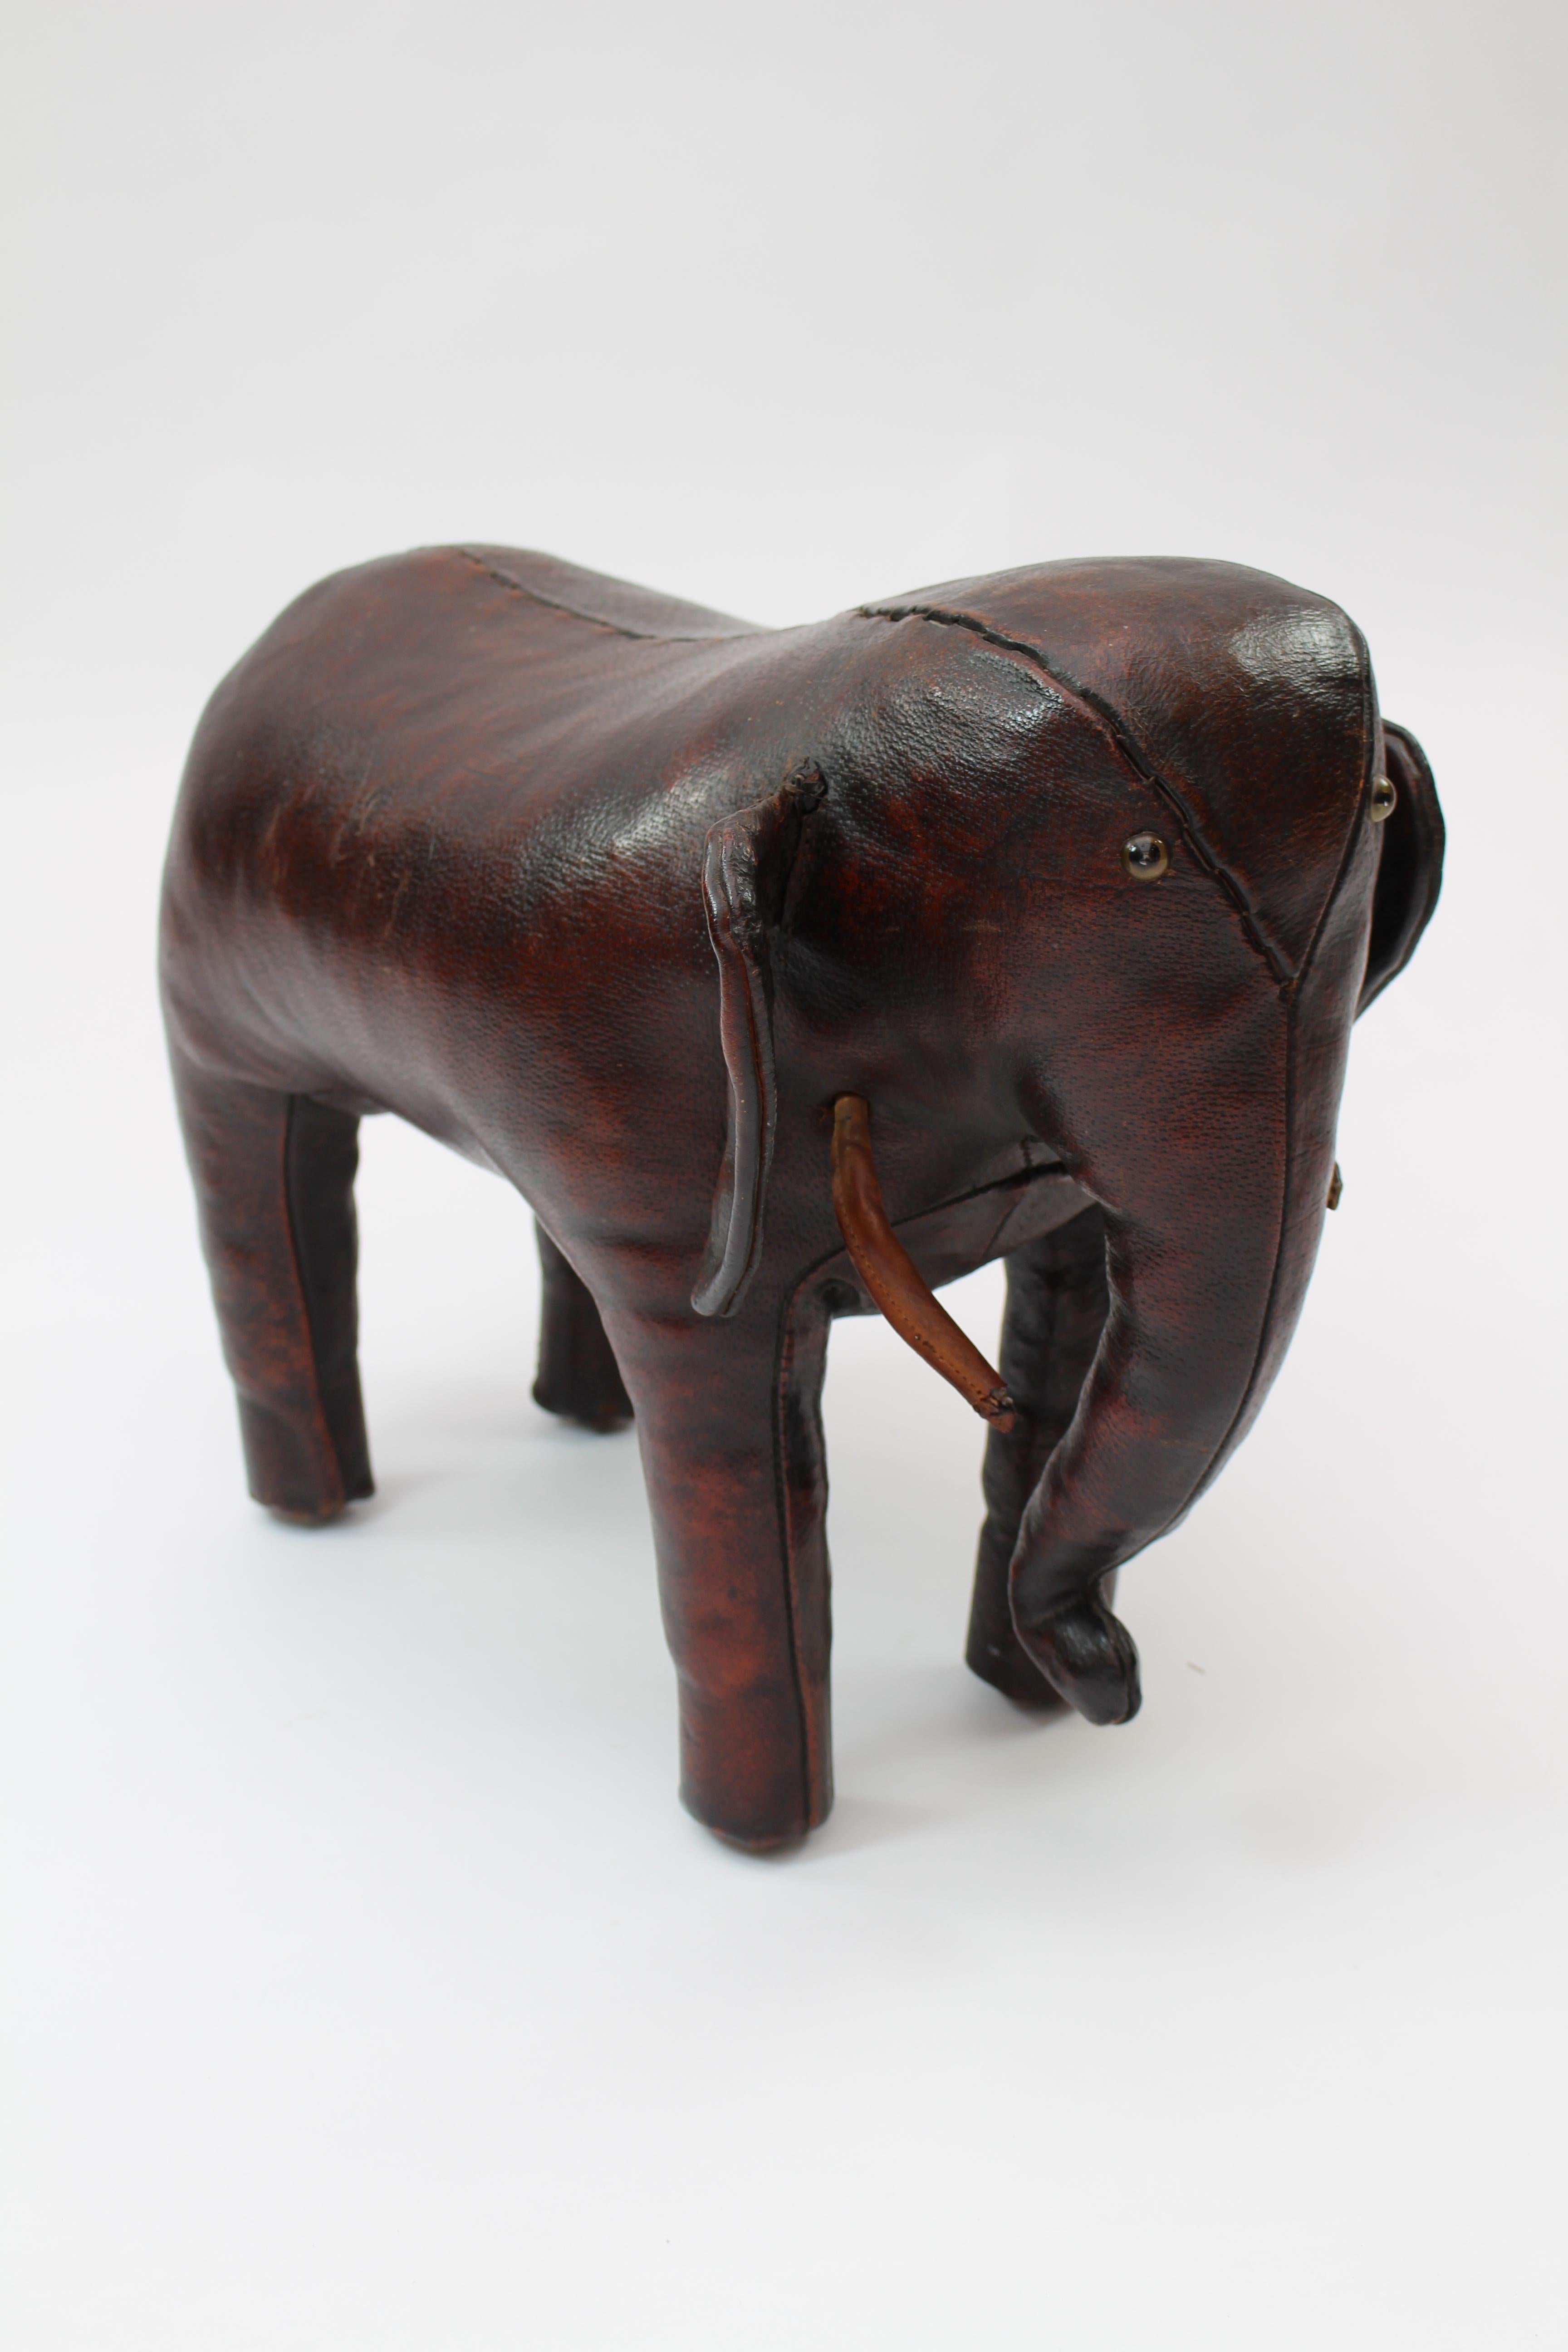 This brown leahter elephant by Omersa has a great patina and is stamped.